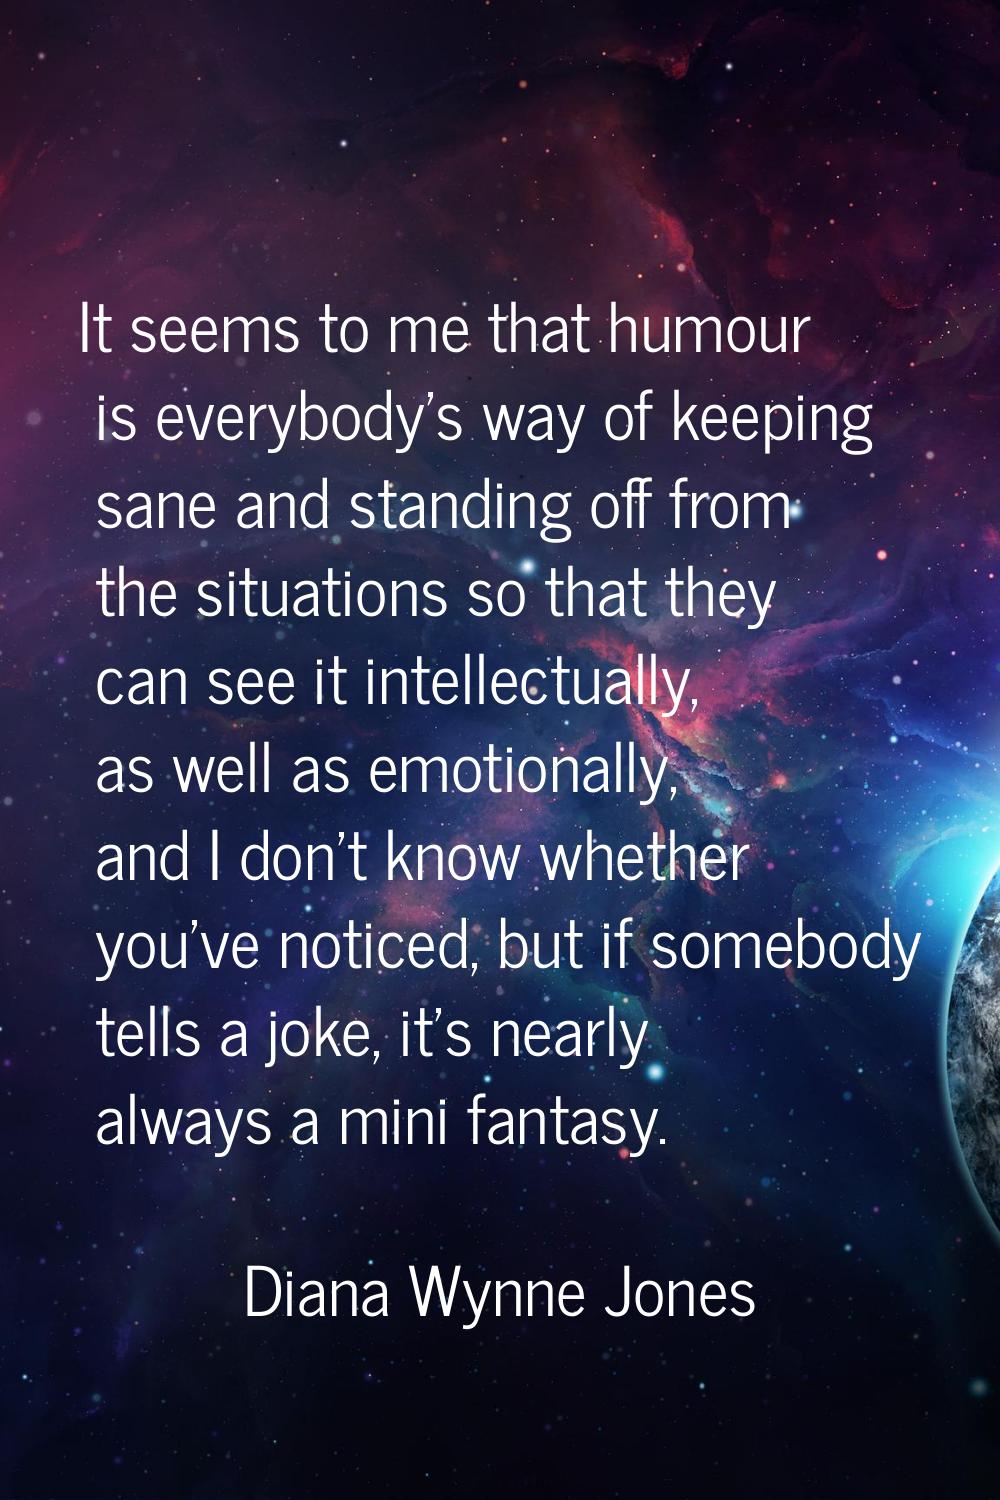 It seems to me that humour is everybody's way of keeping sane and standing off from the situations 